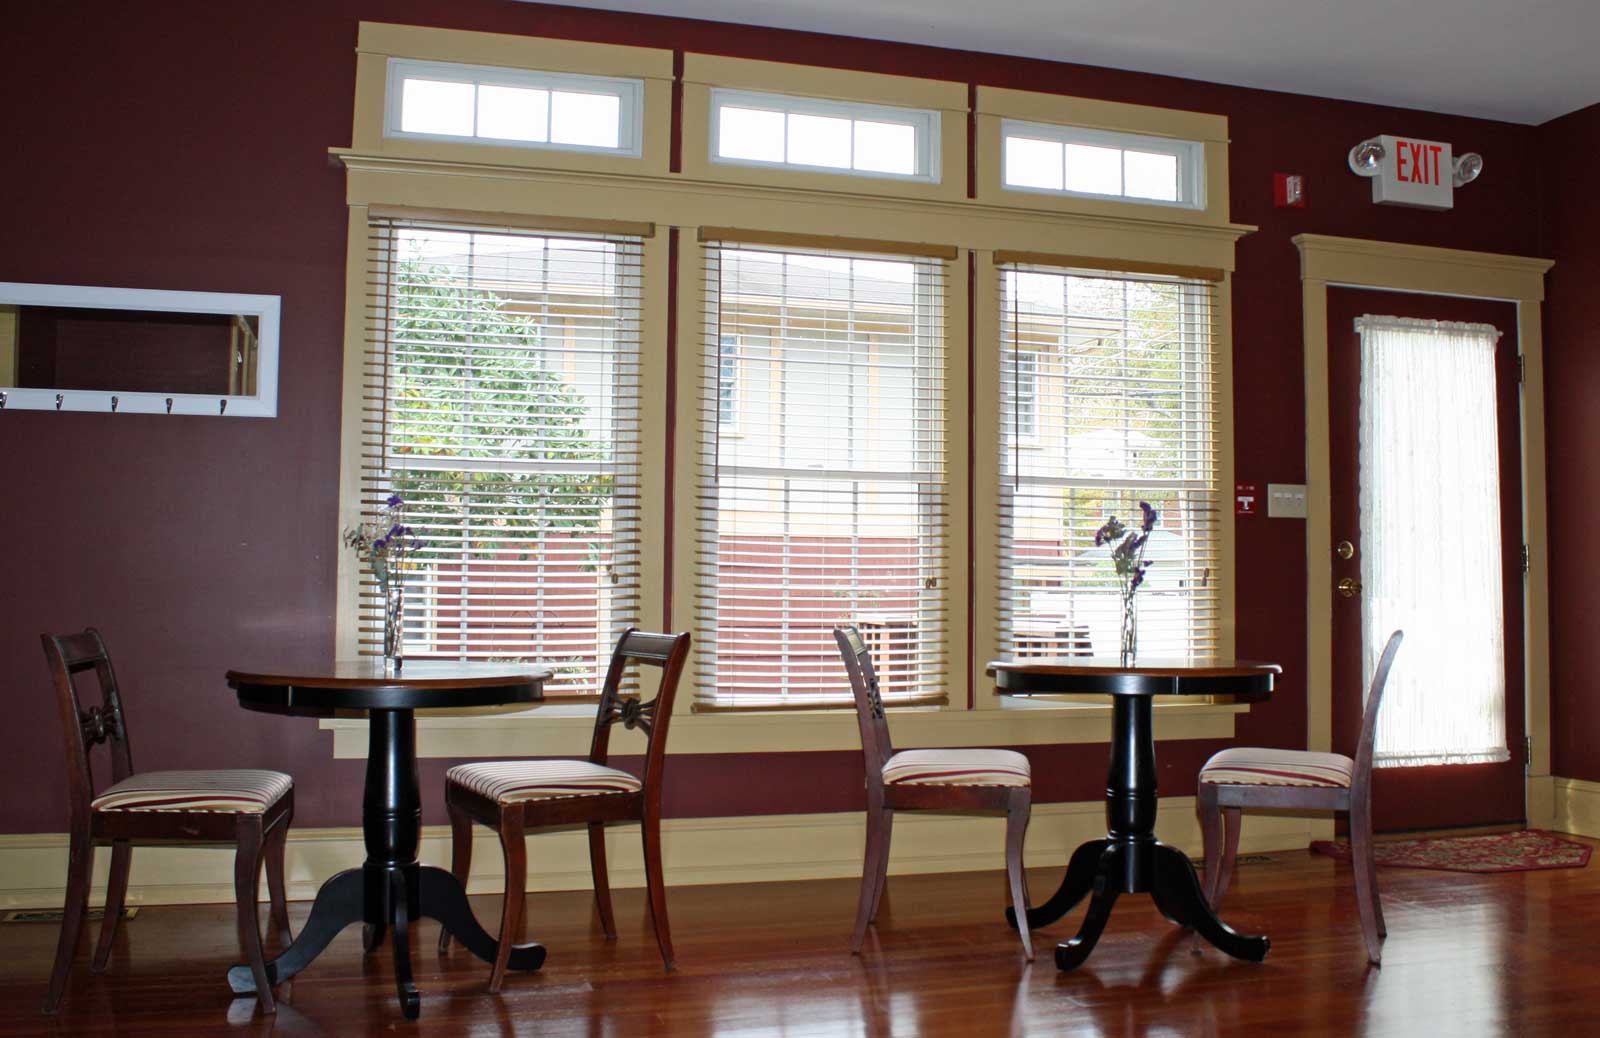 Rear of dining room with two small tables for two